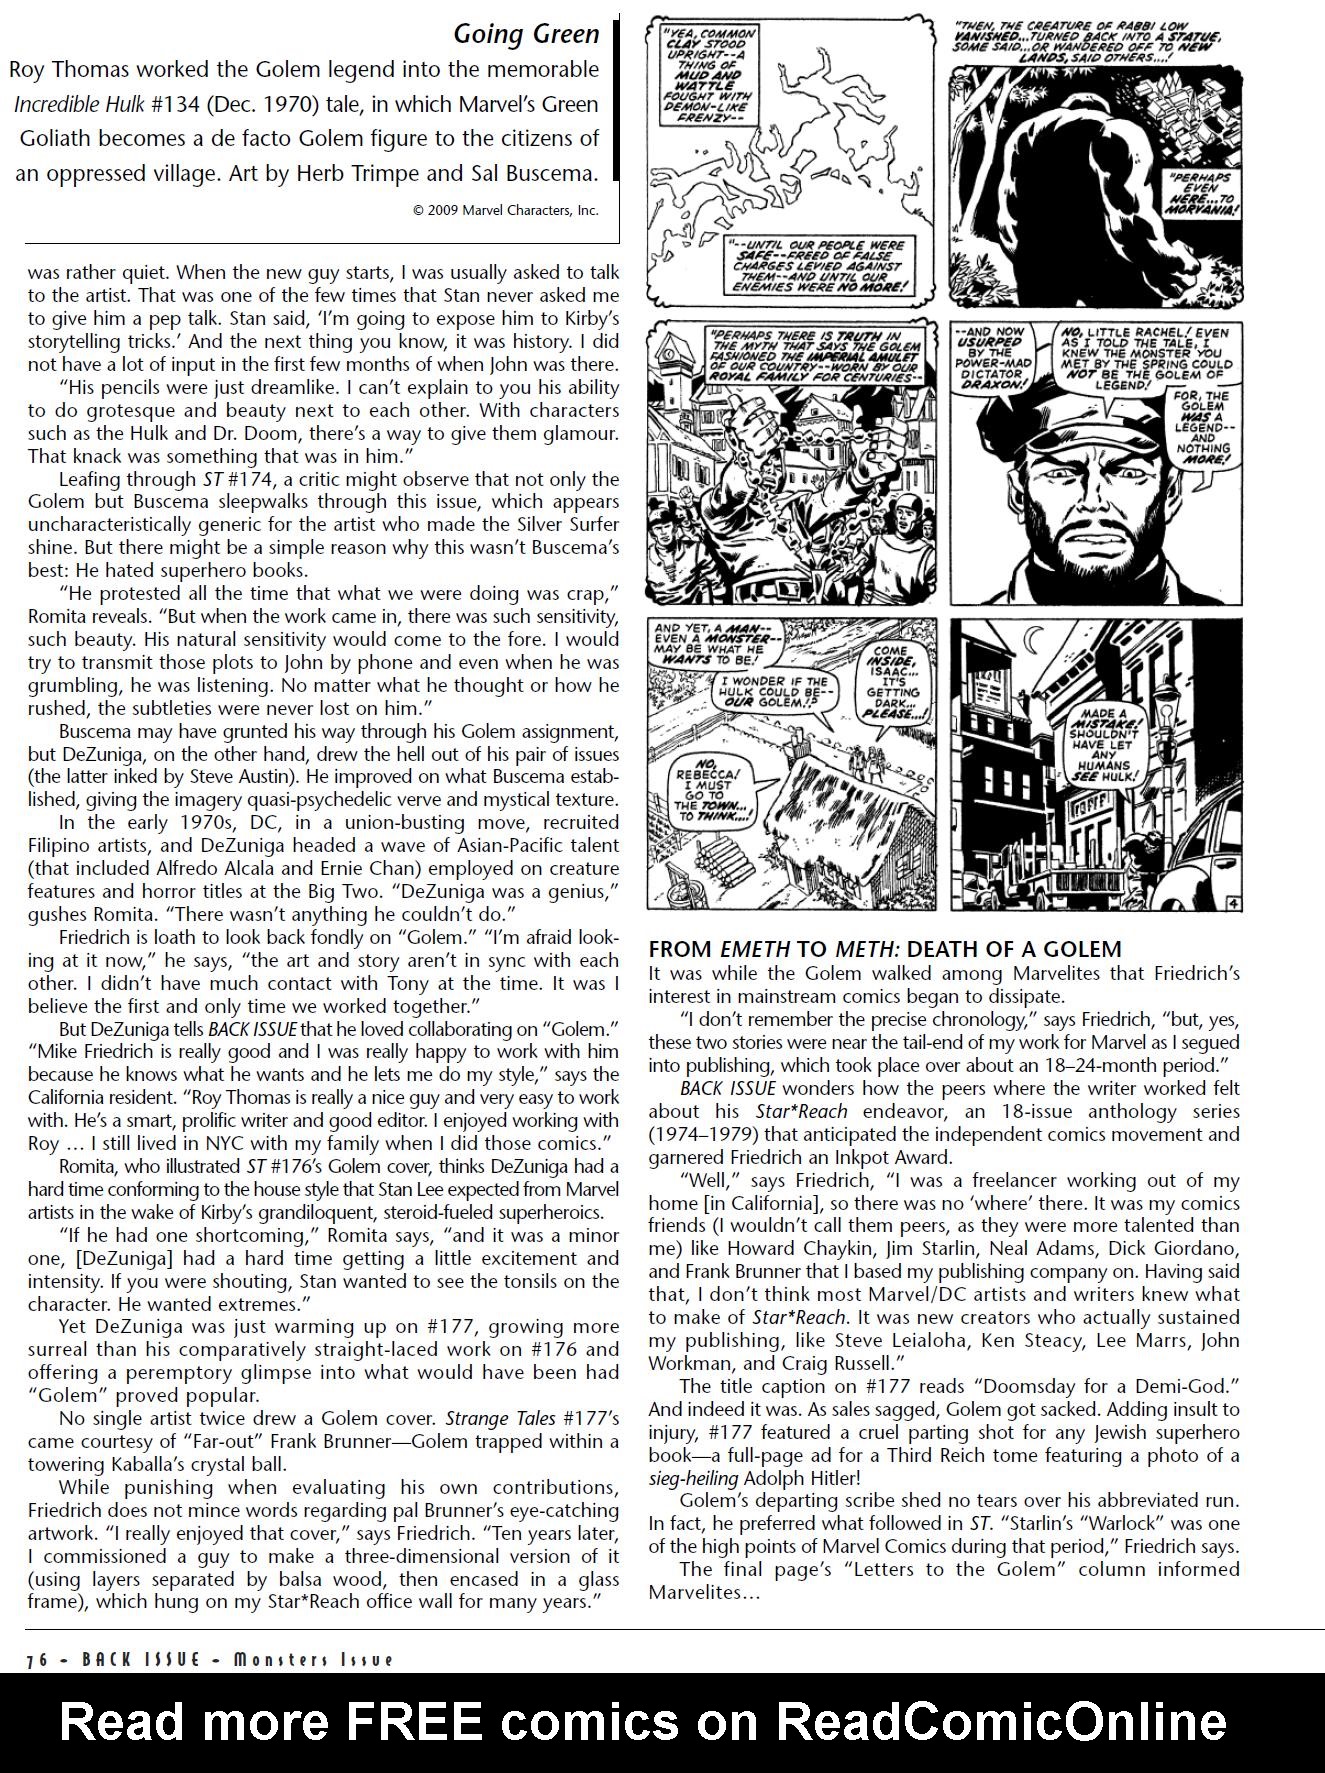 Read online Back Issue comic -  Issue #36 - 78